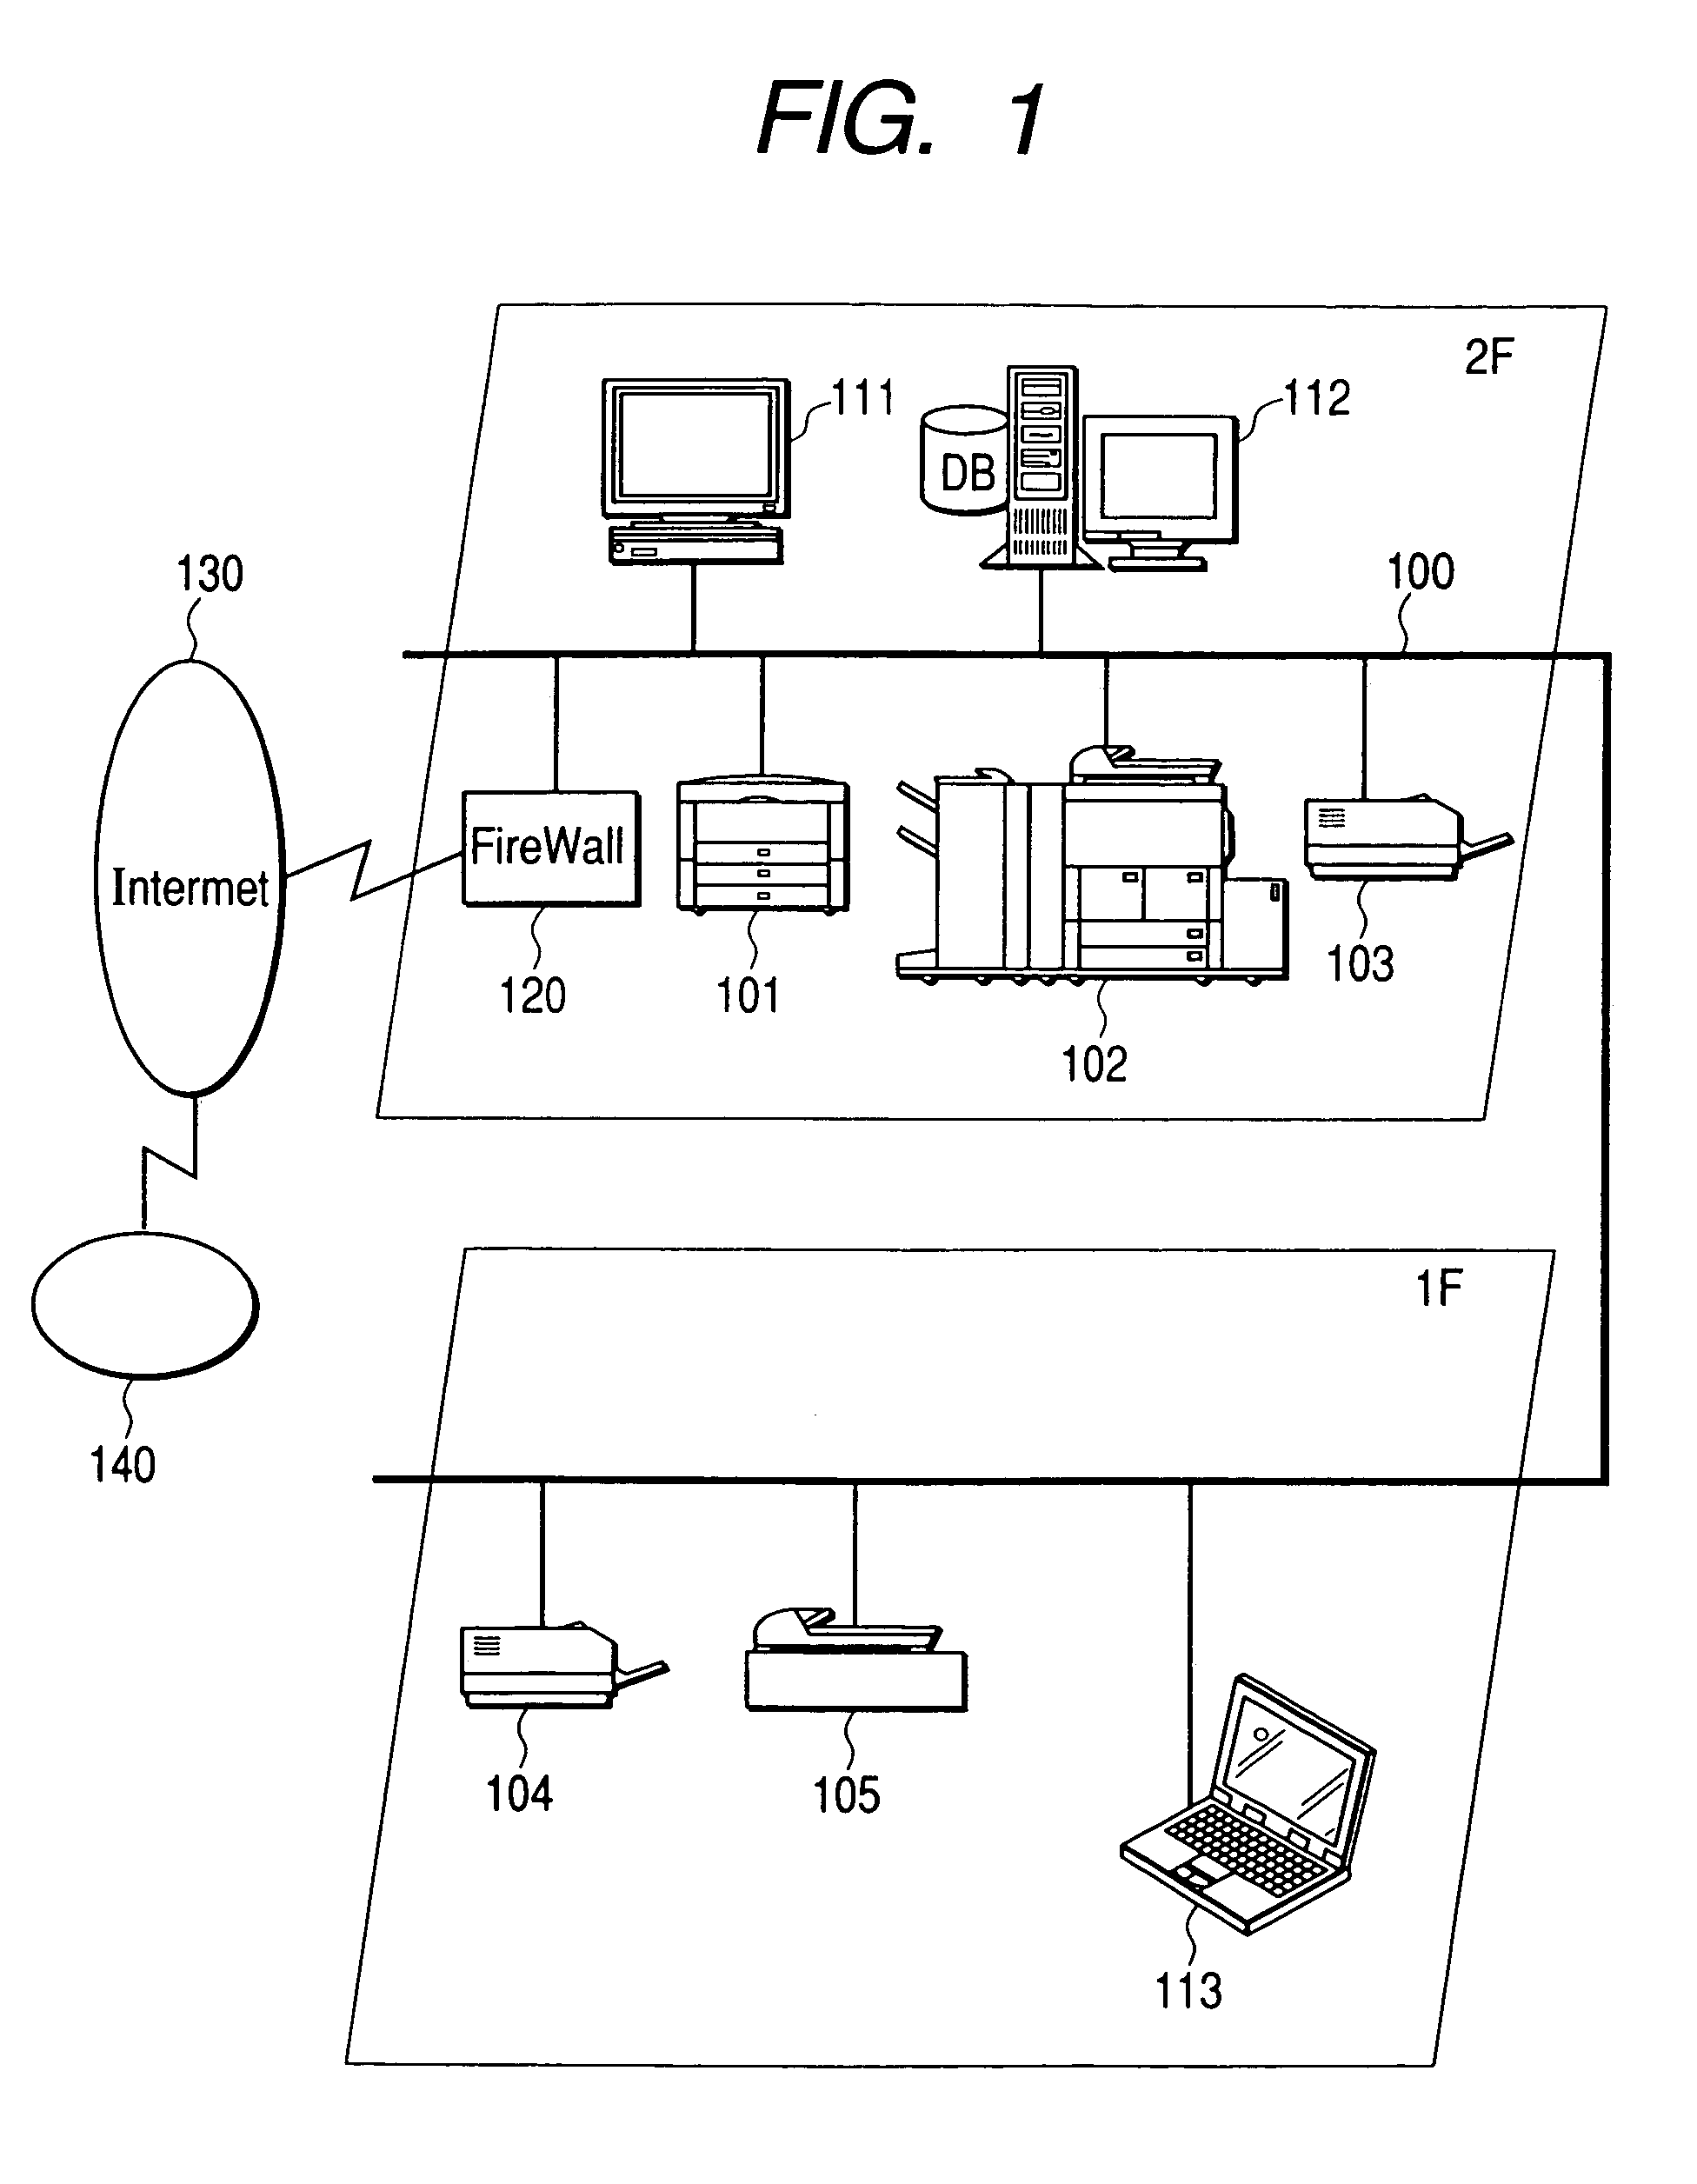 Processing method of device information and network device in device information management system